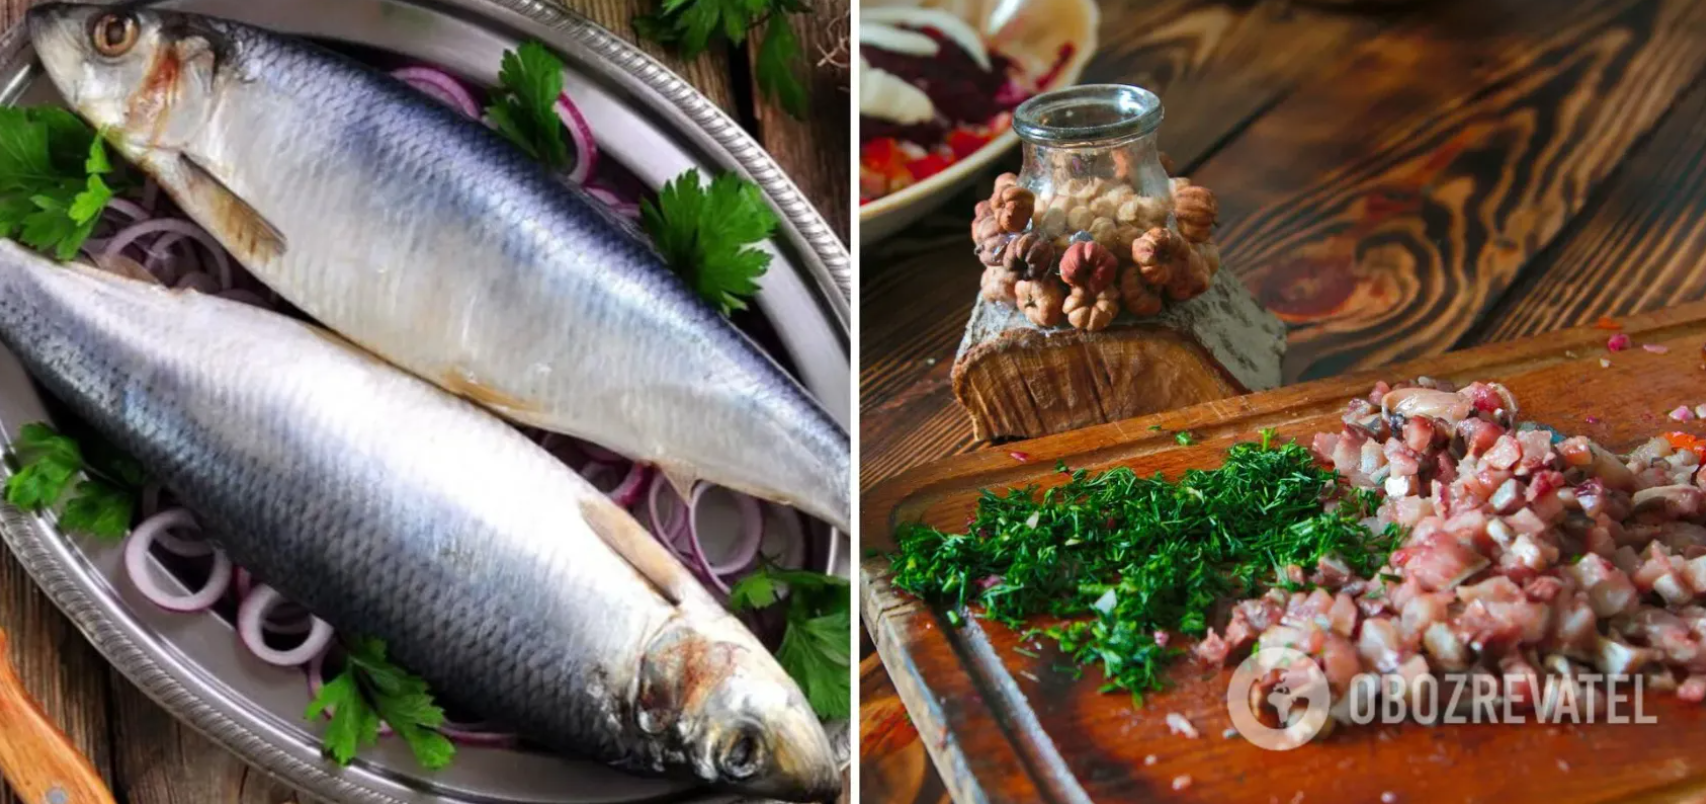 What to make with herring